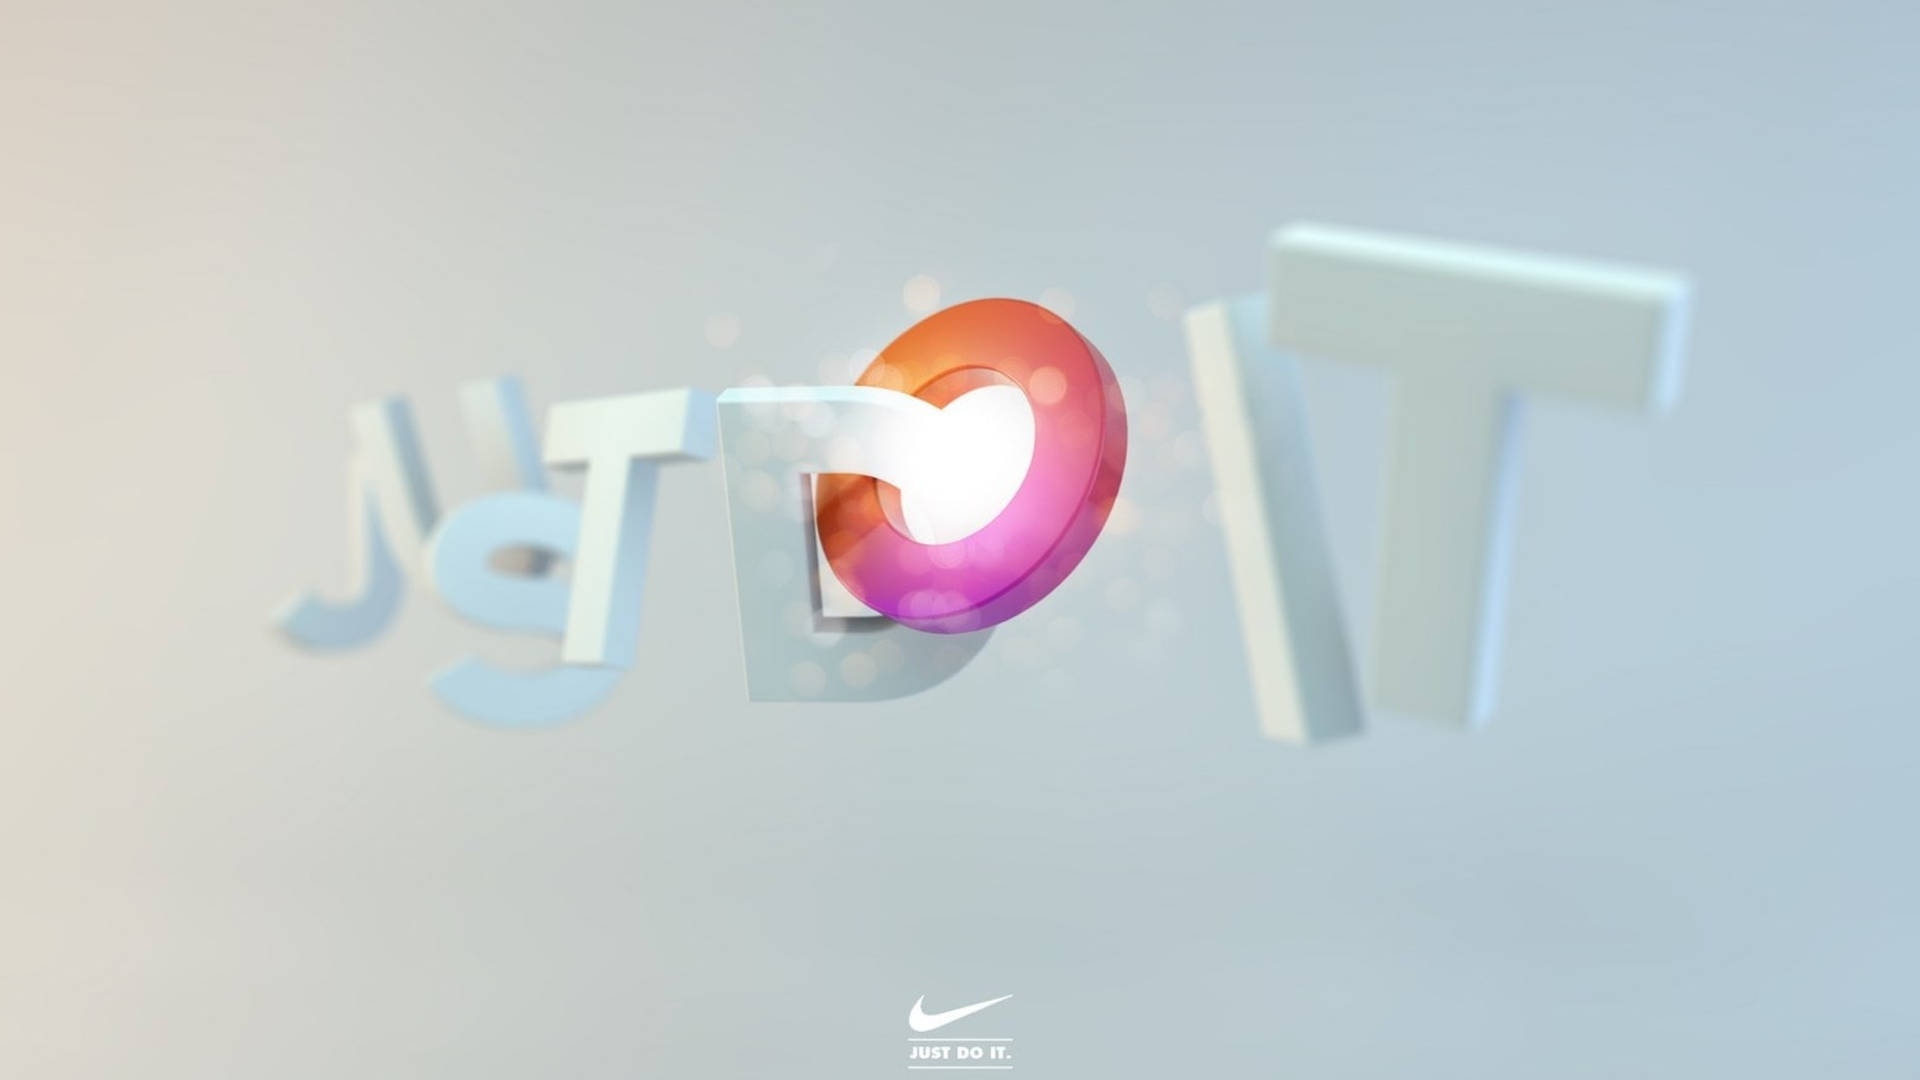 Just Do It 2560X1440 Wallpaper and Background Image